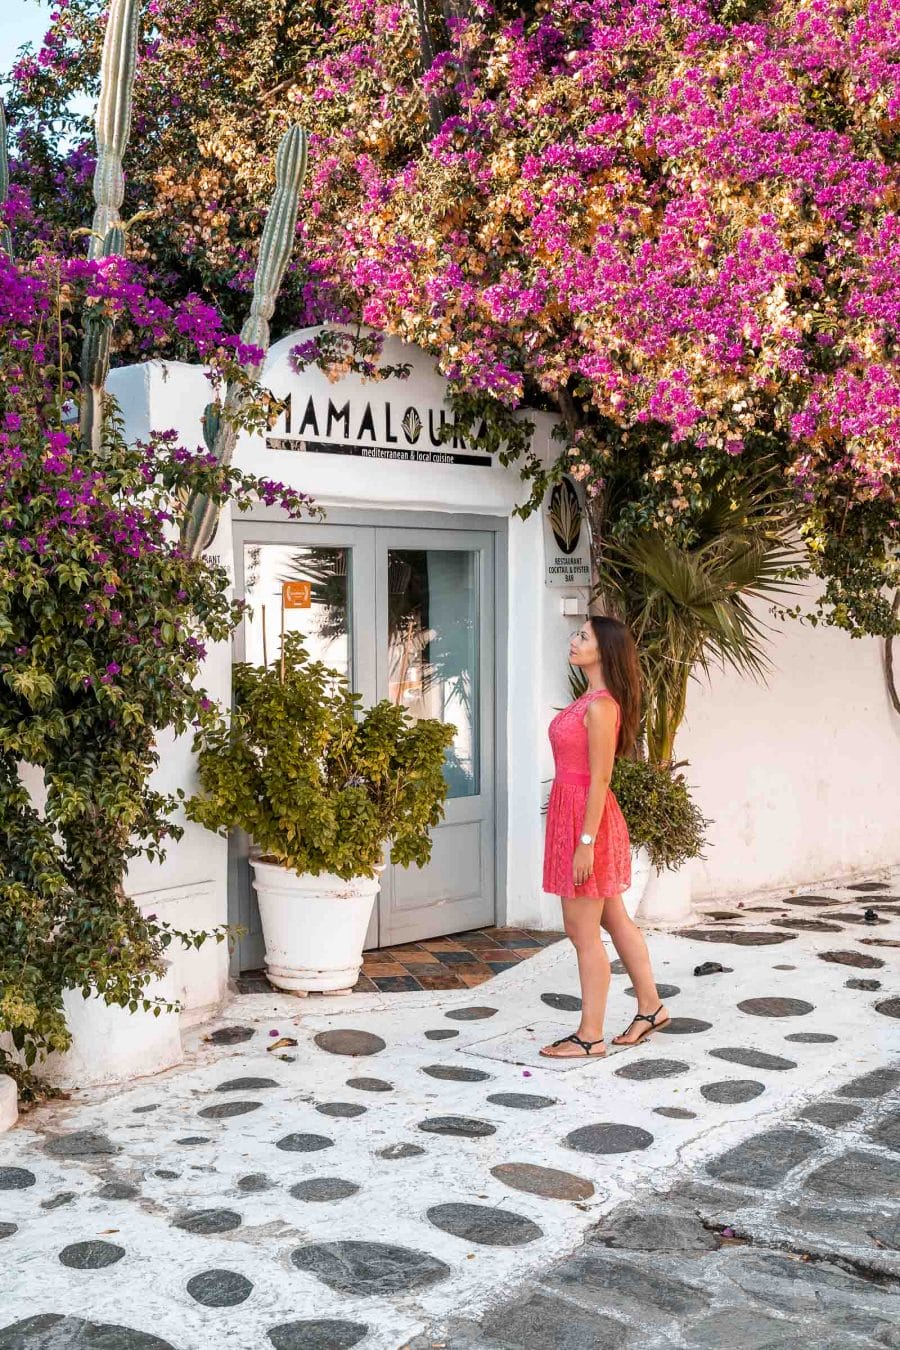 Girl in a pink dress standing in front of Mamalouka Restaurant in Mykonos